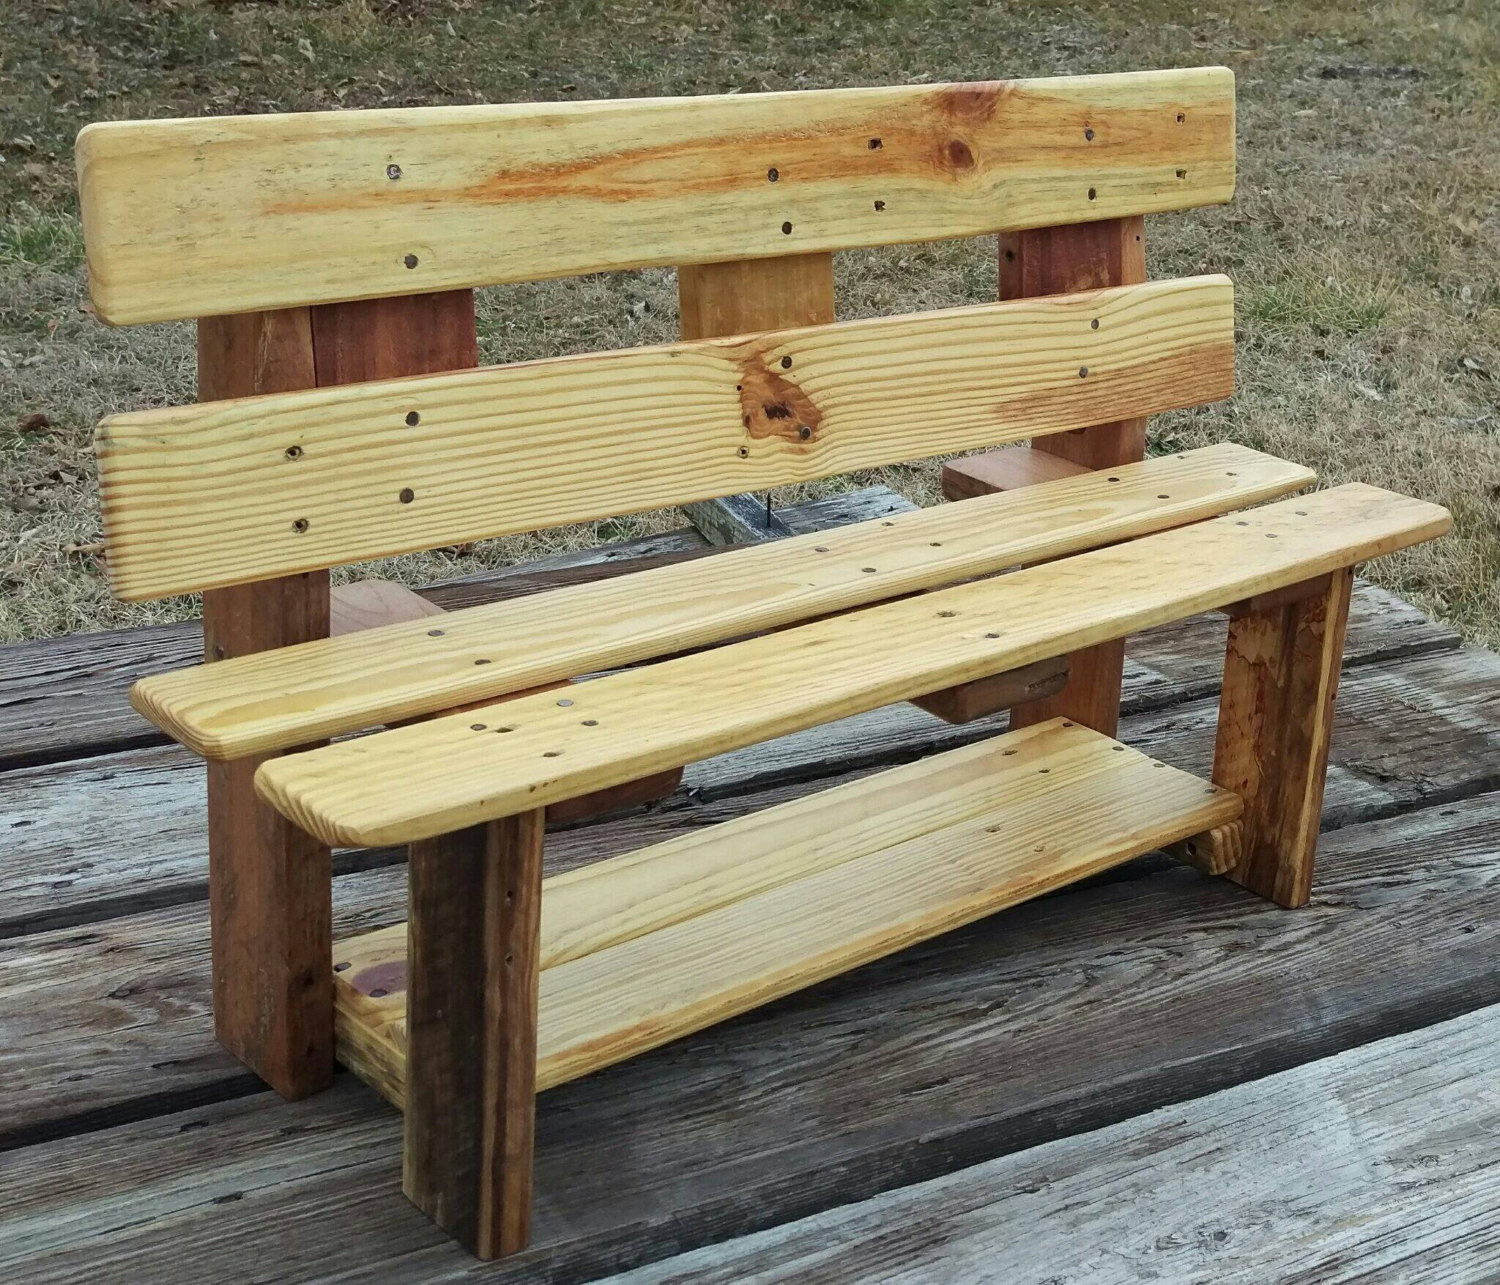 DIY Wood Furniture Projects
 16 Genius Handmade Pallet Wood Furniture Ideas You Will